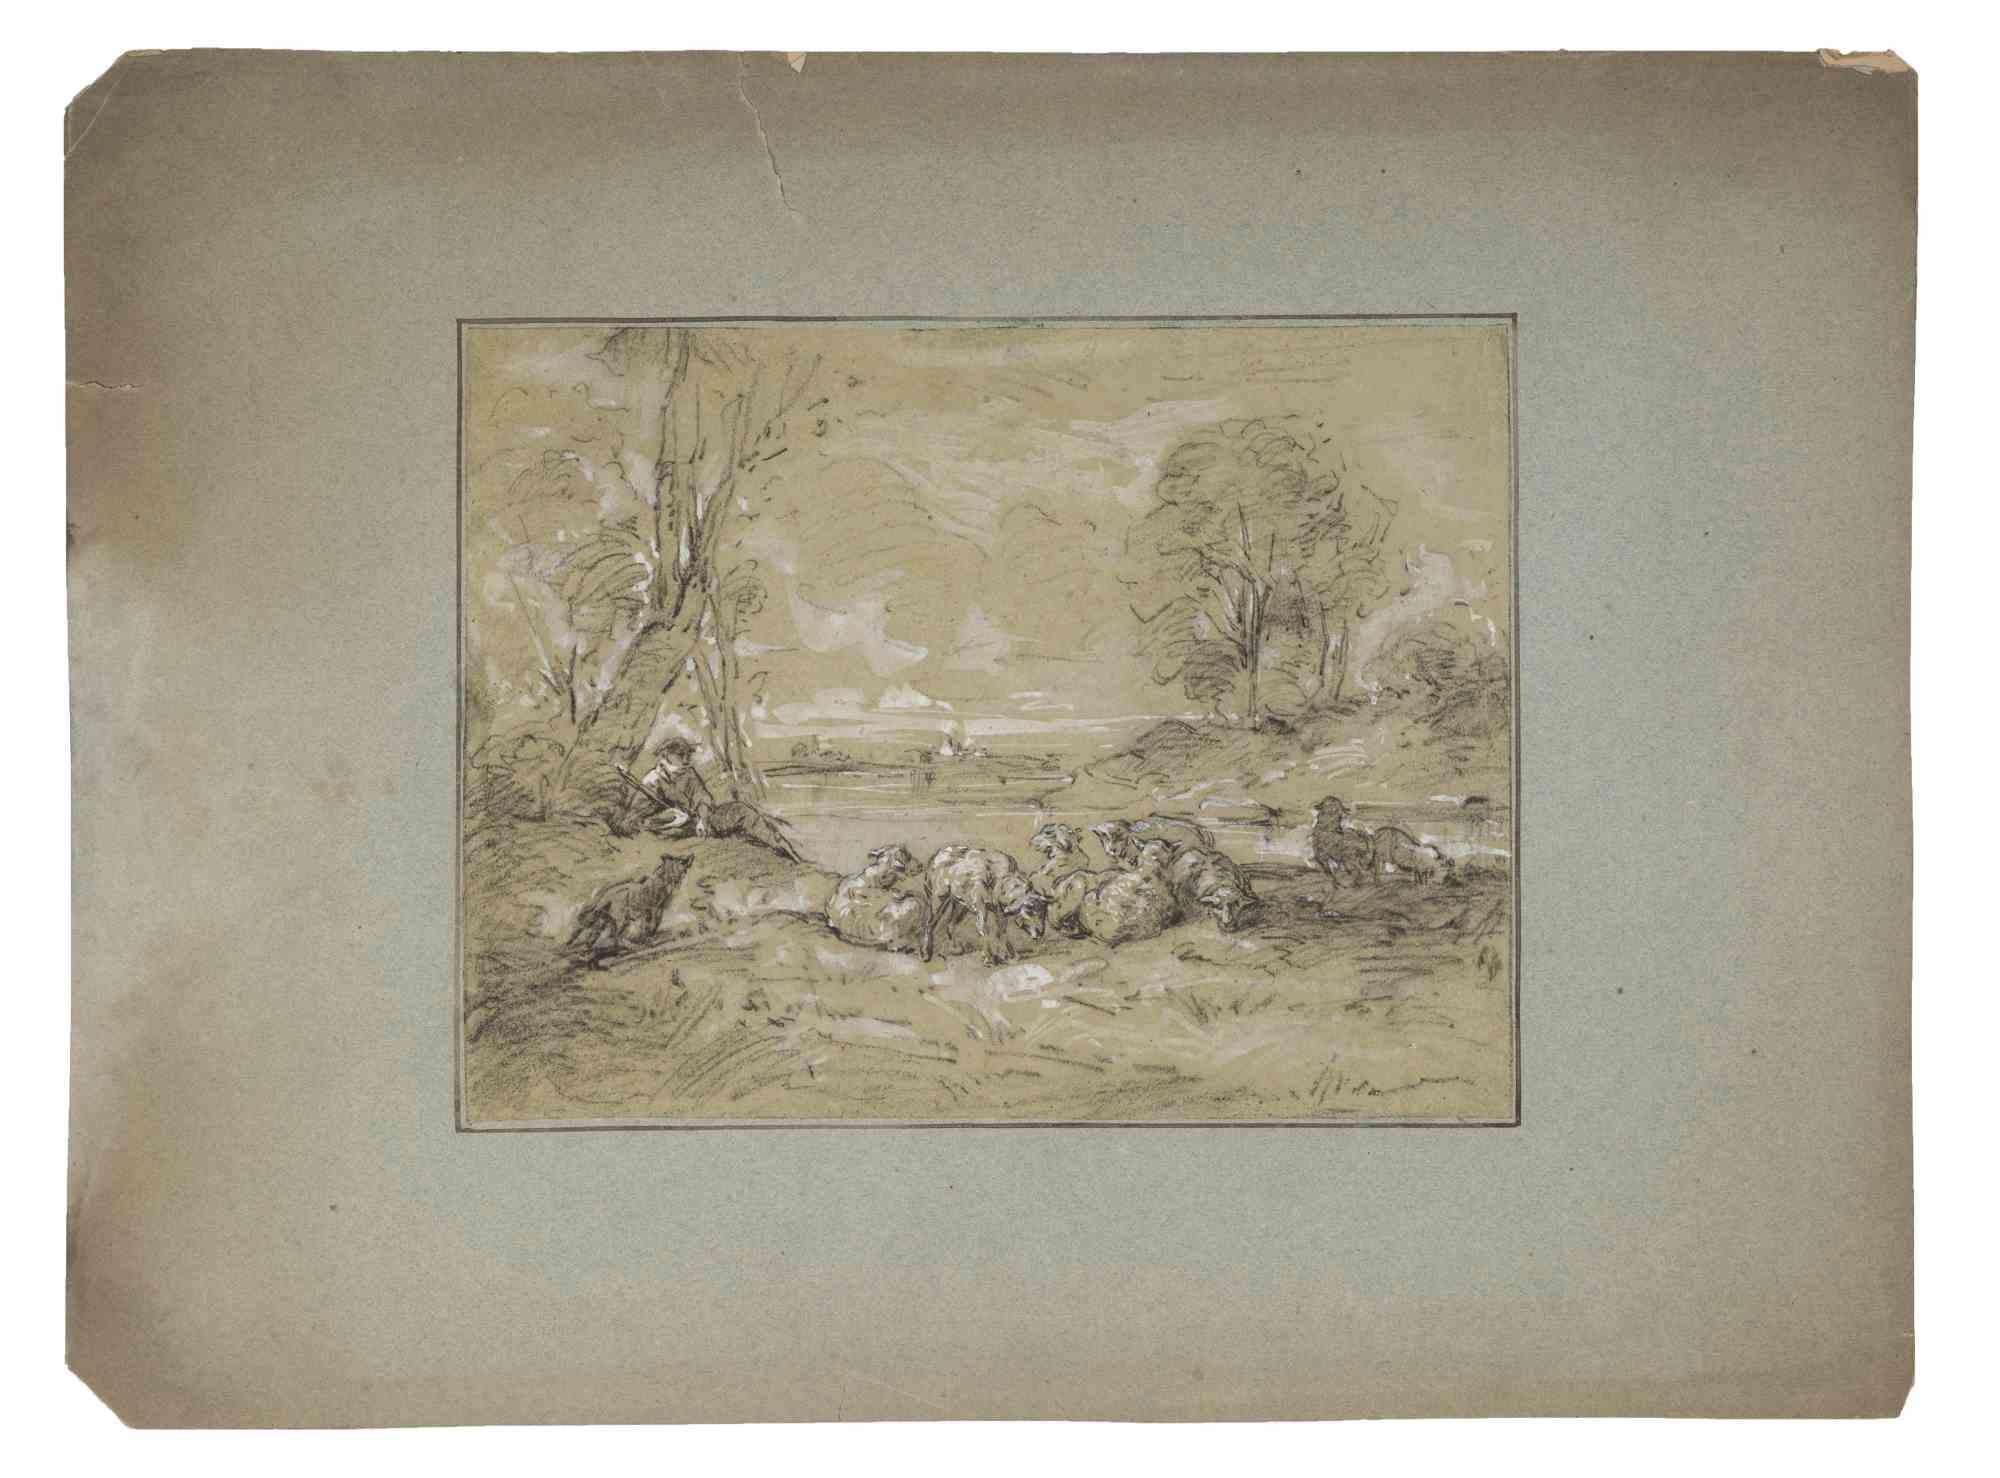 The Landscape is a drawing in pencil and white lead on paper realized by Joseph Dumas Descules (1813-1885).

Applied on a Passepartout 30 x 41 cm, with a cutting at the top of the Passepartout.

Good conditions.

The artwork is realized through deft